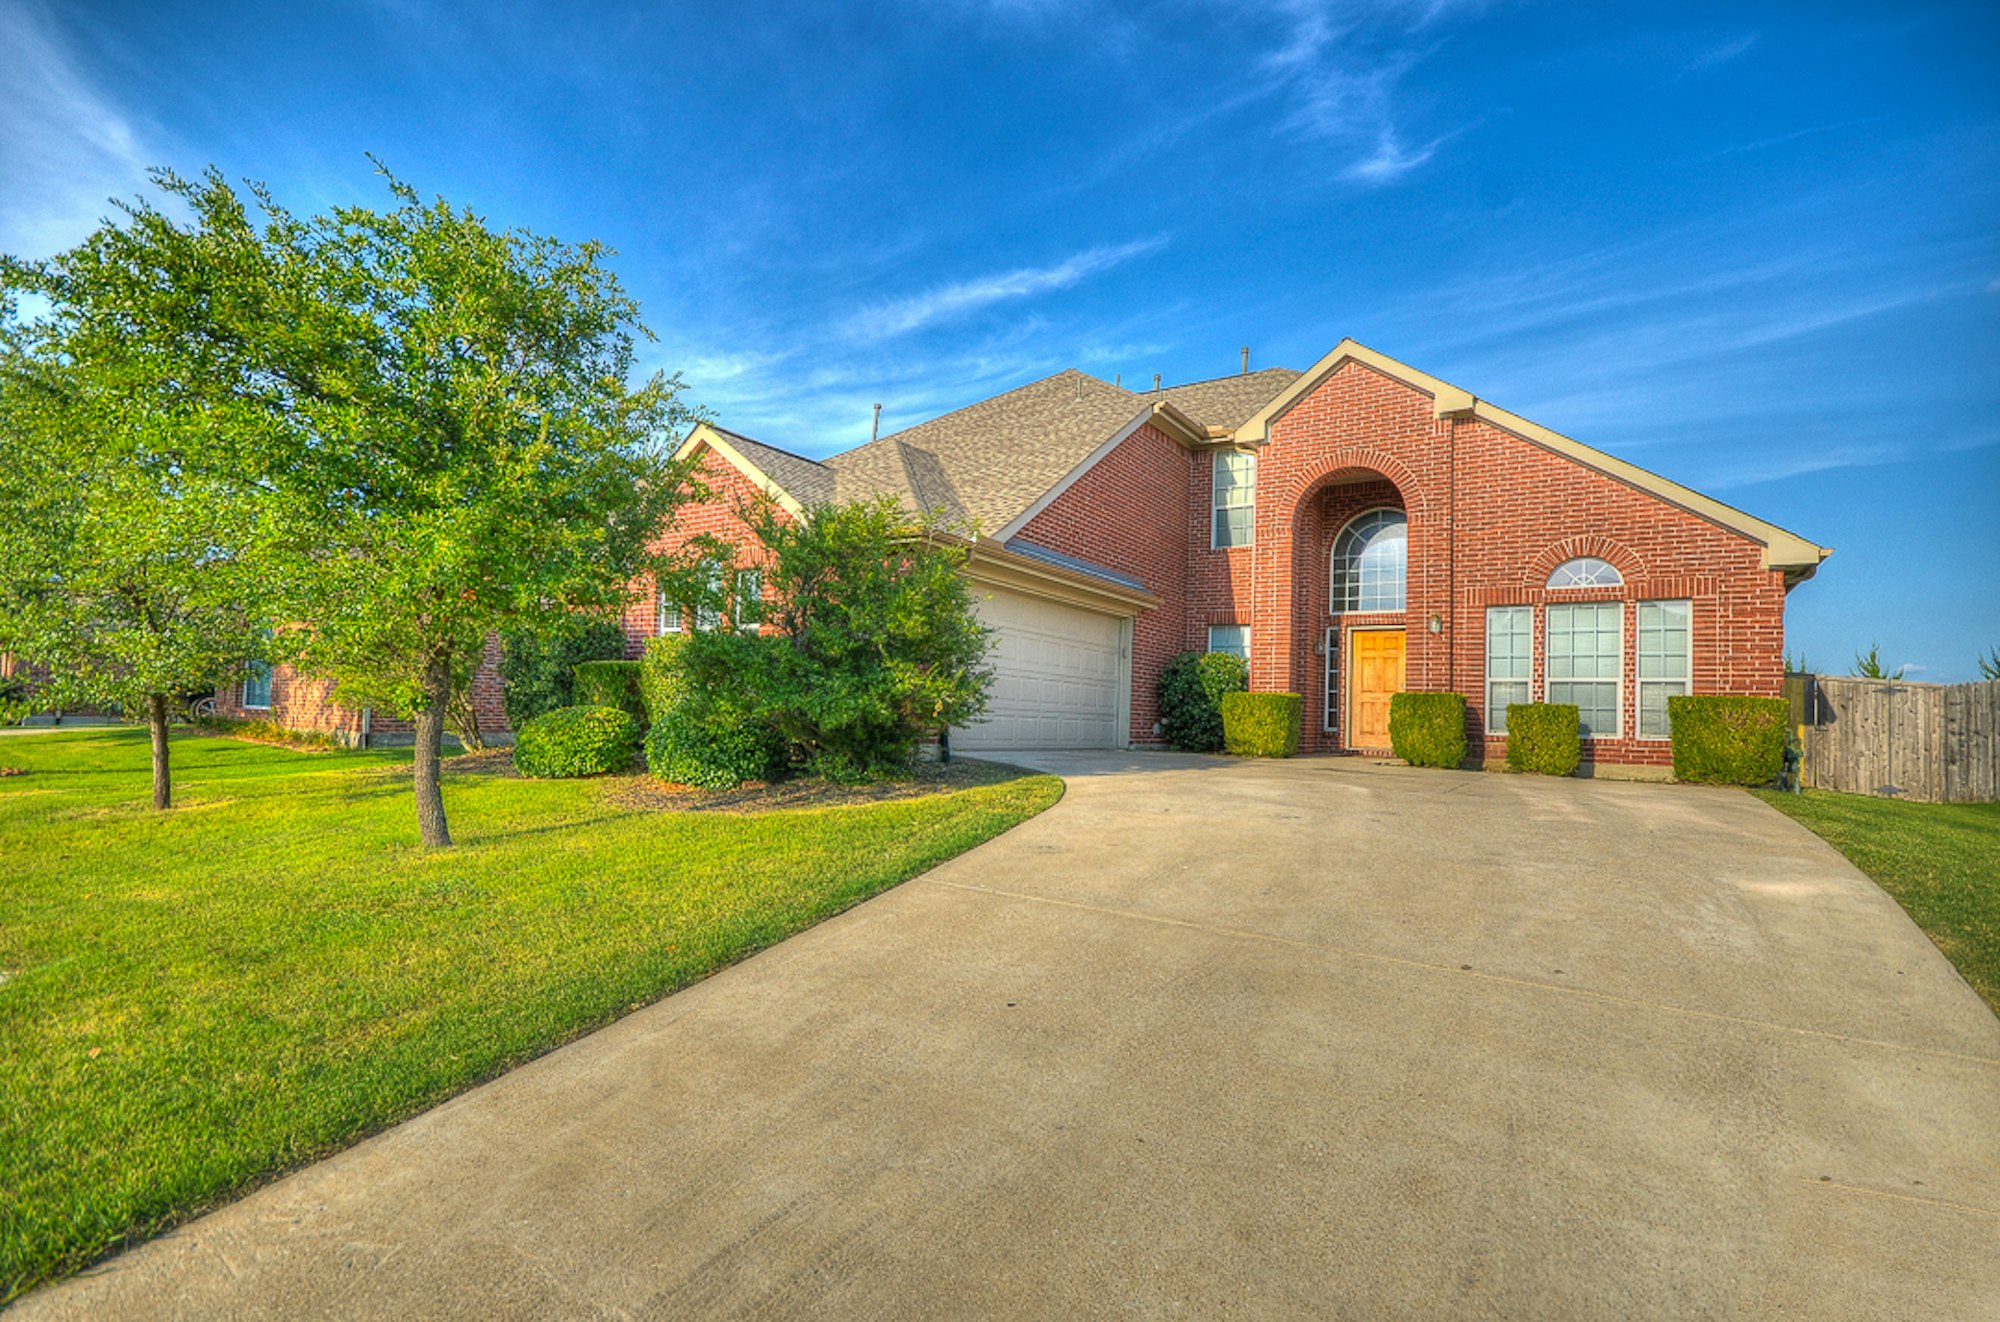 Photo 1 of 36 - 9112 Commonwealth Dr, Frisco, TX 75033